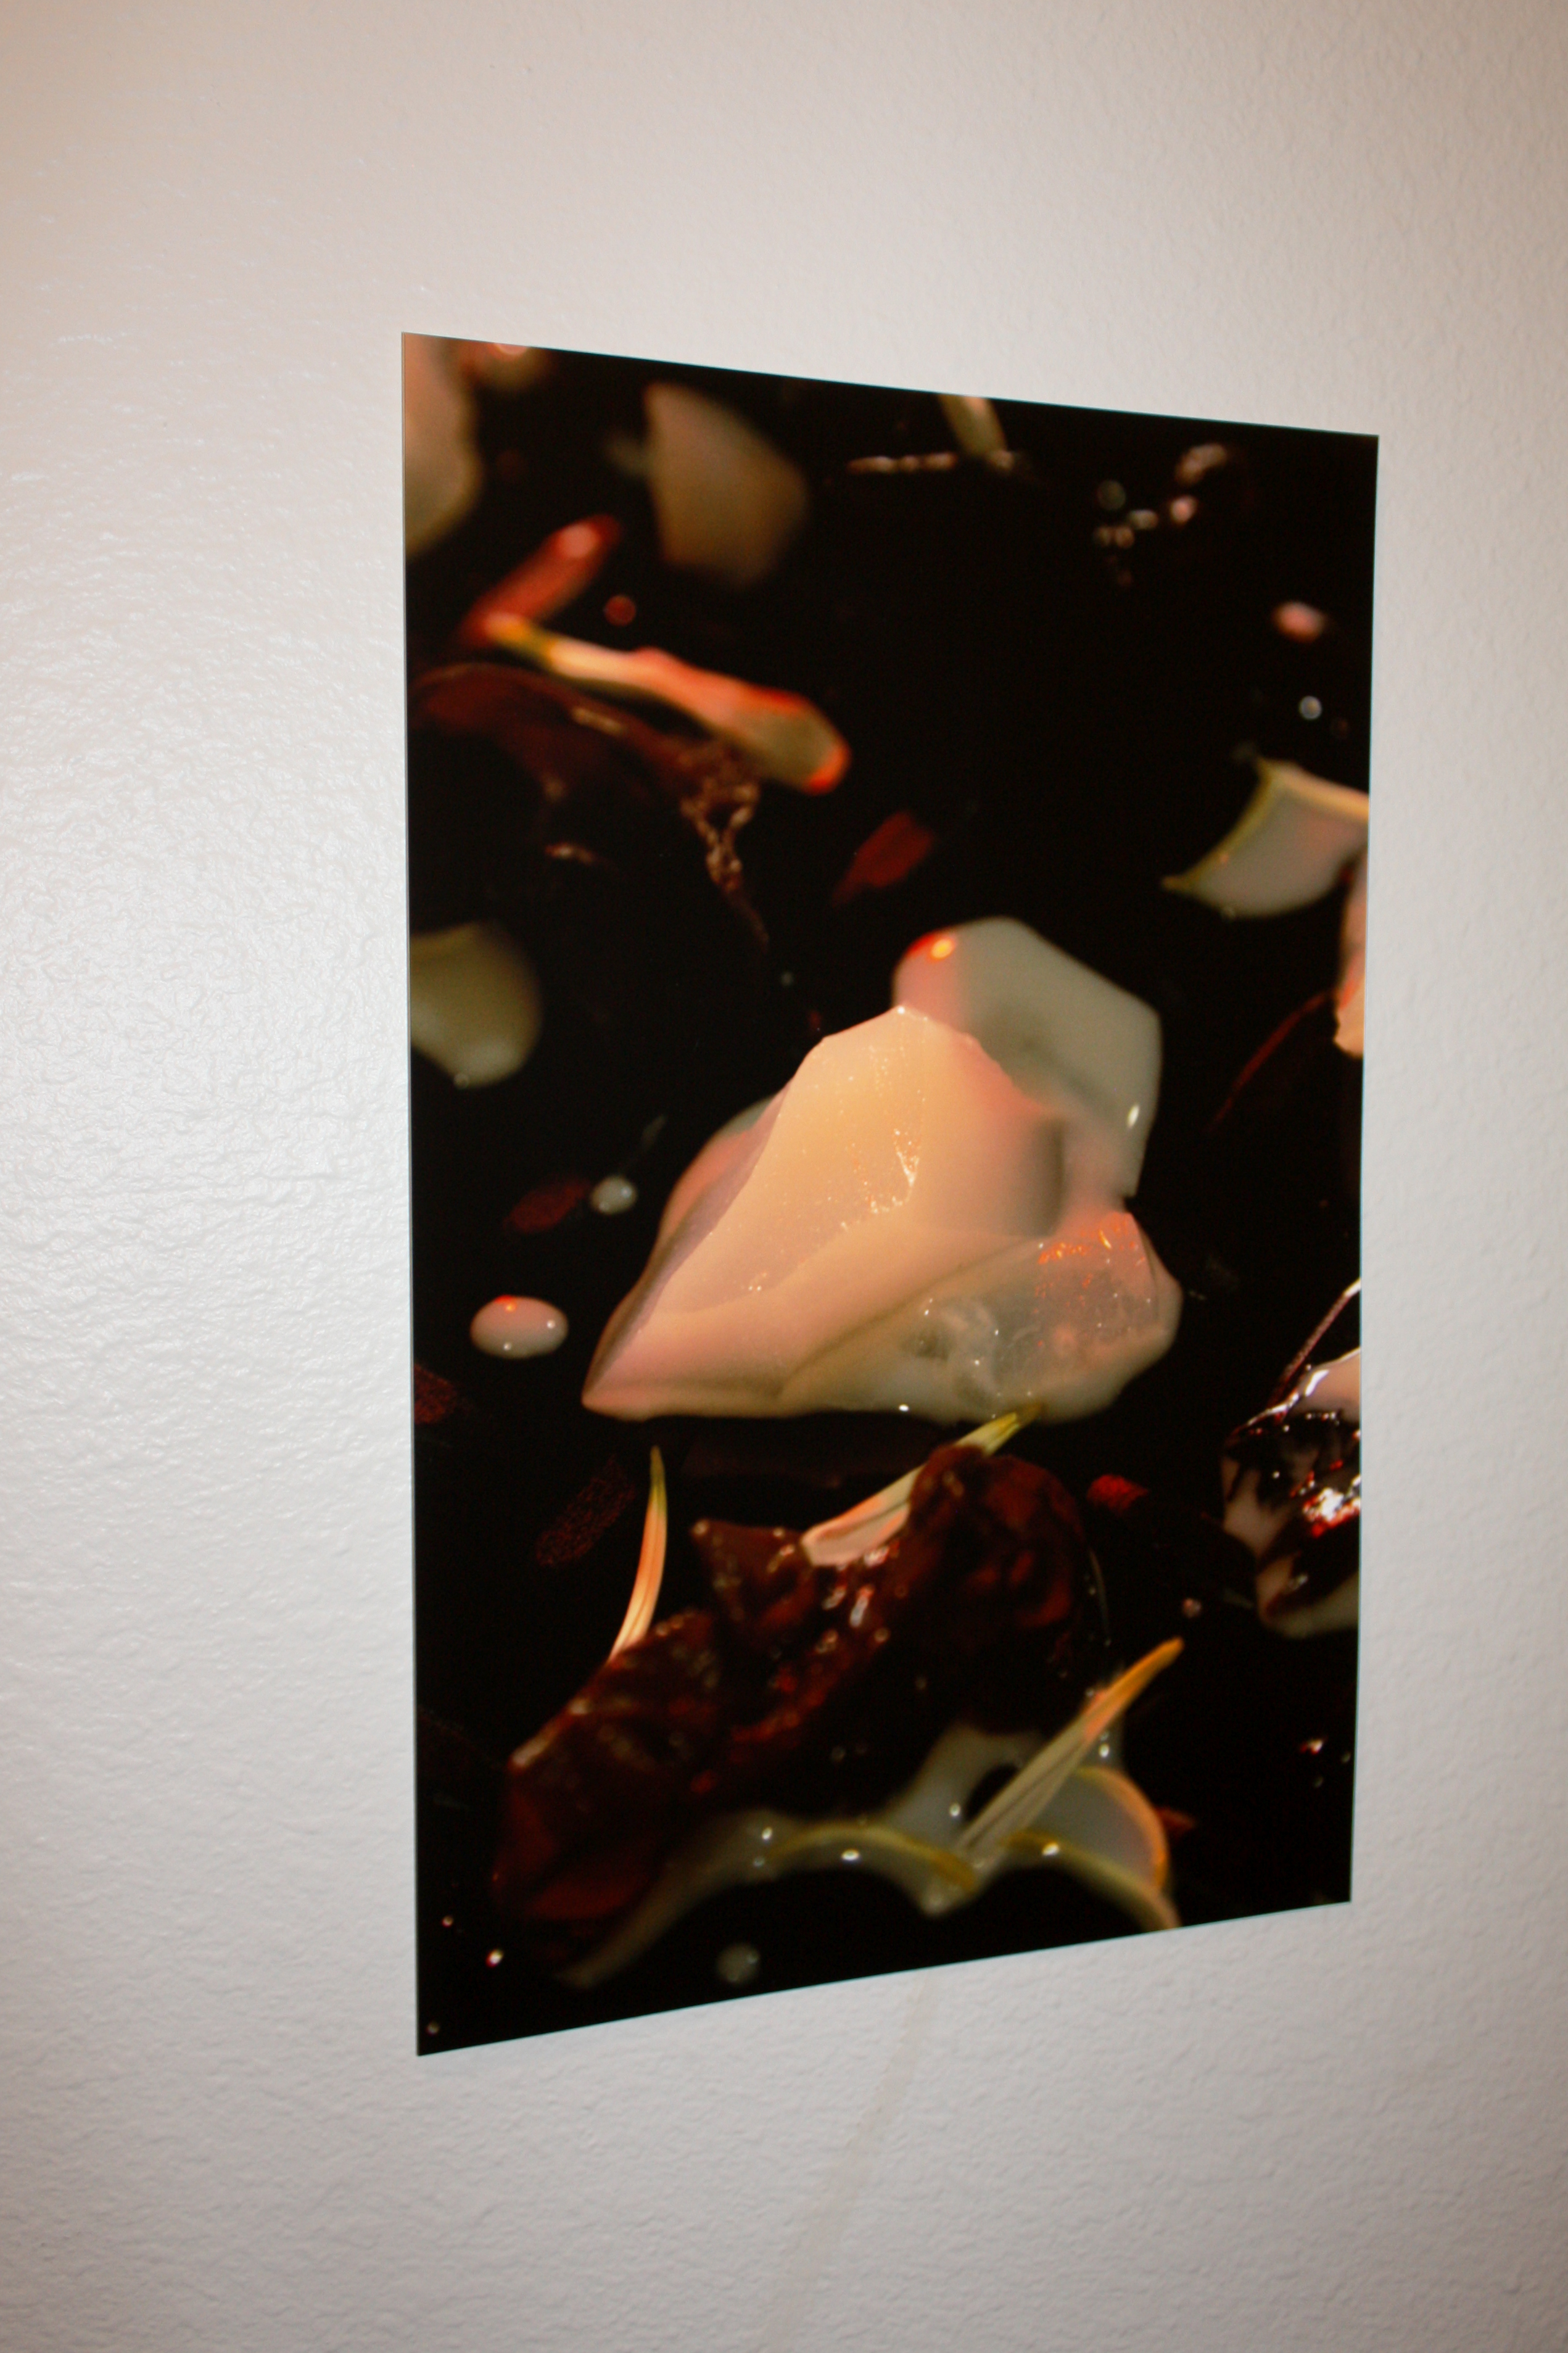 Detail of a photo print of jelly